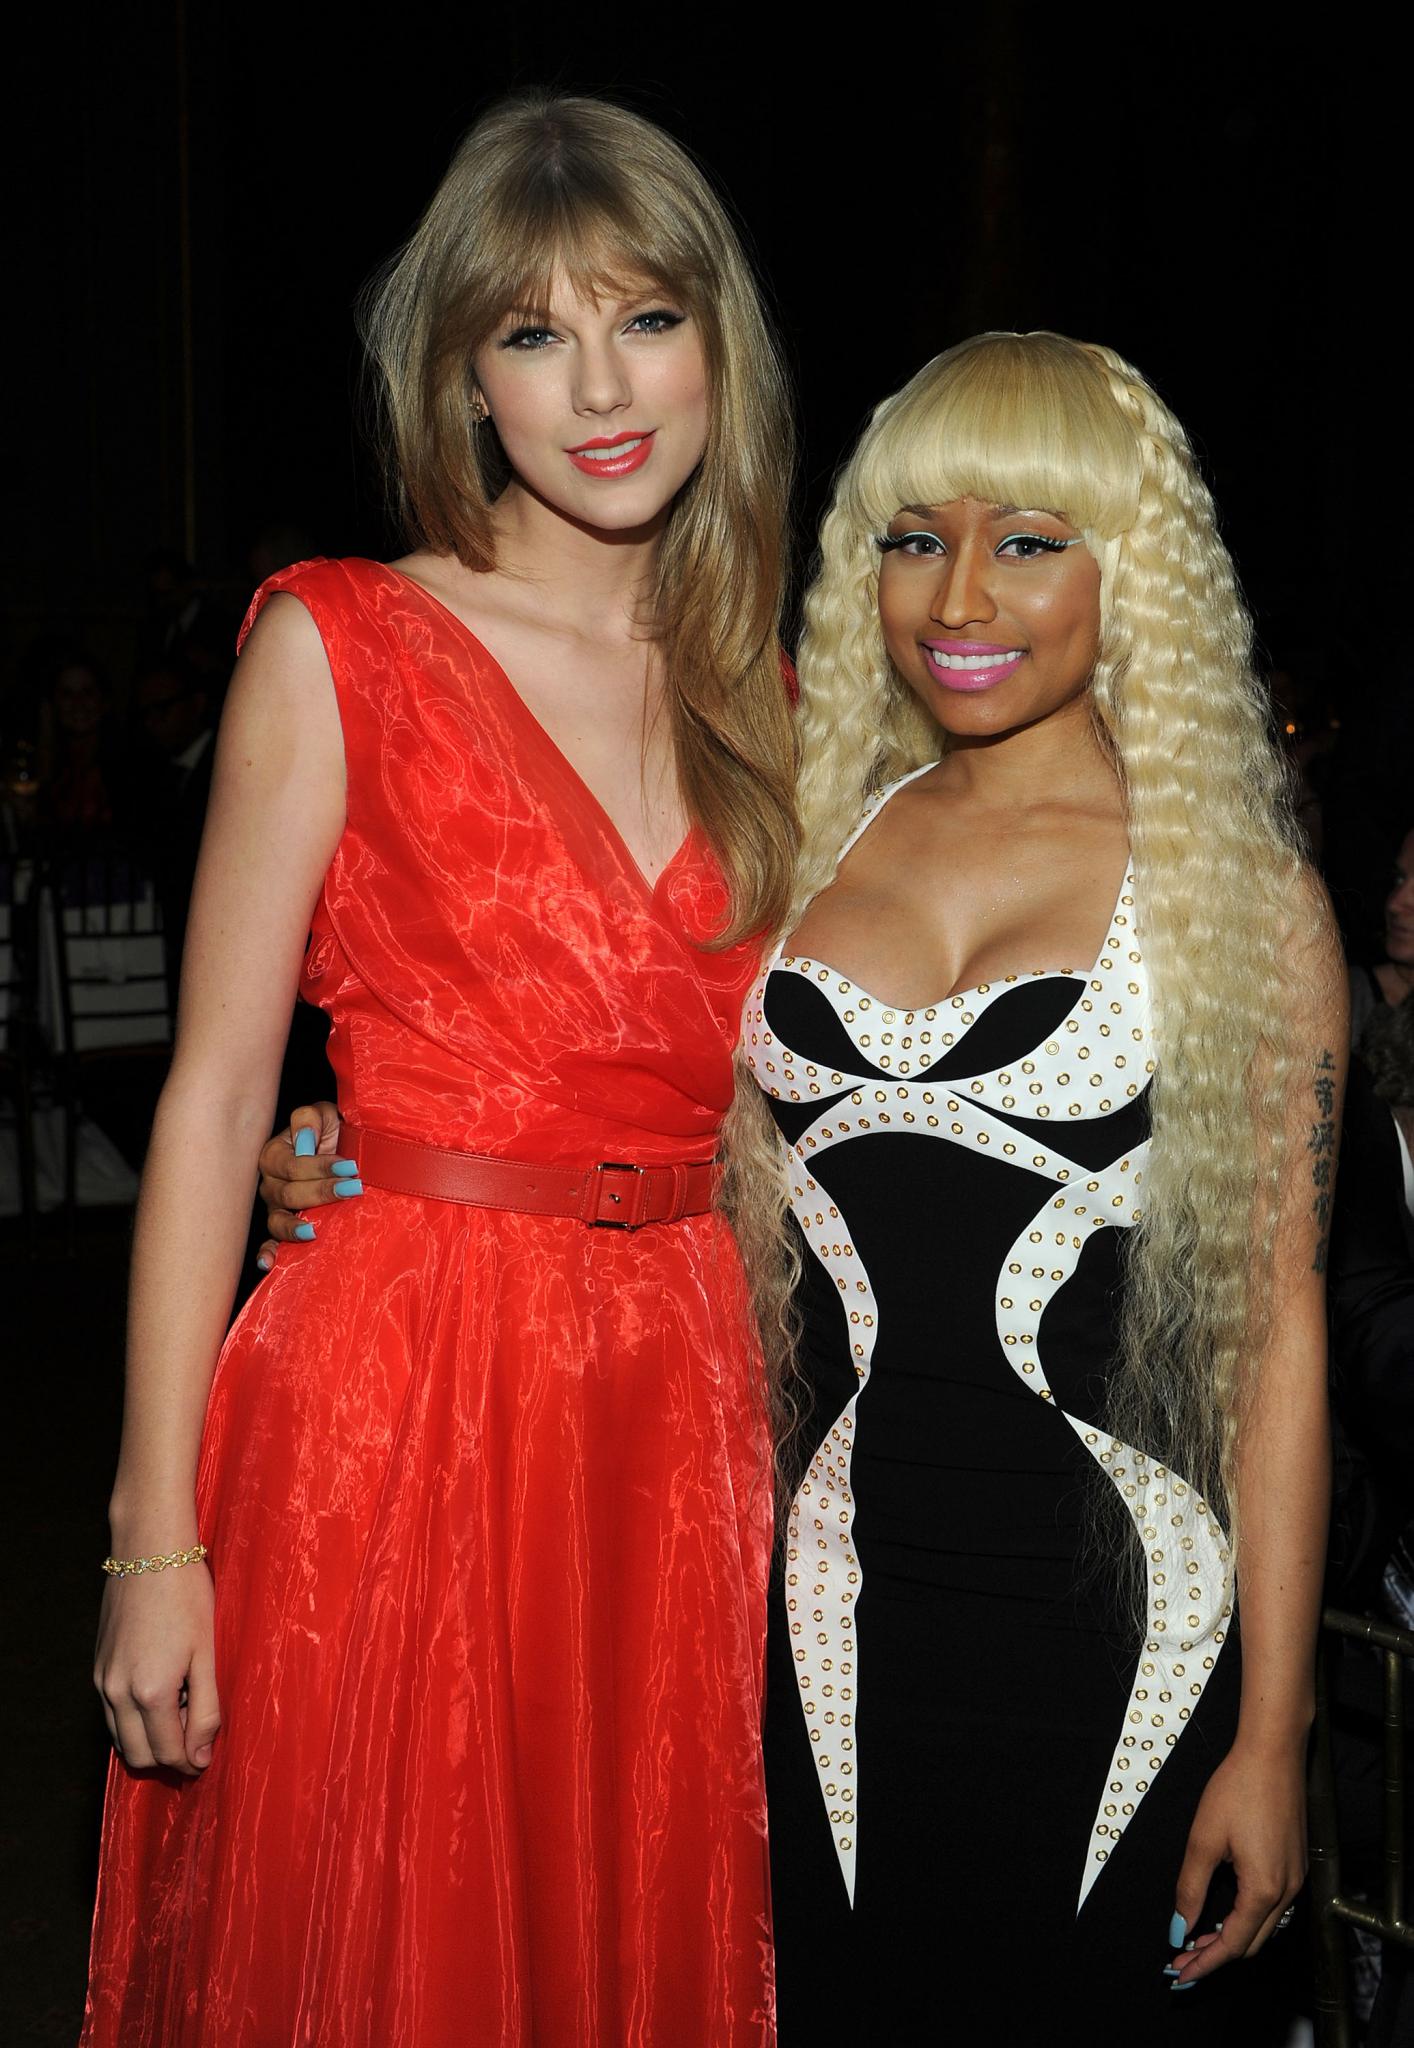 There's No More Drama Between Nicki Minaj and Taylor Swift: 'We Spoke, It's Over'